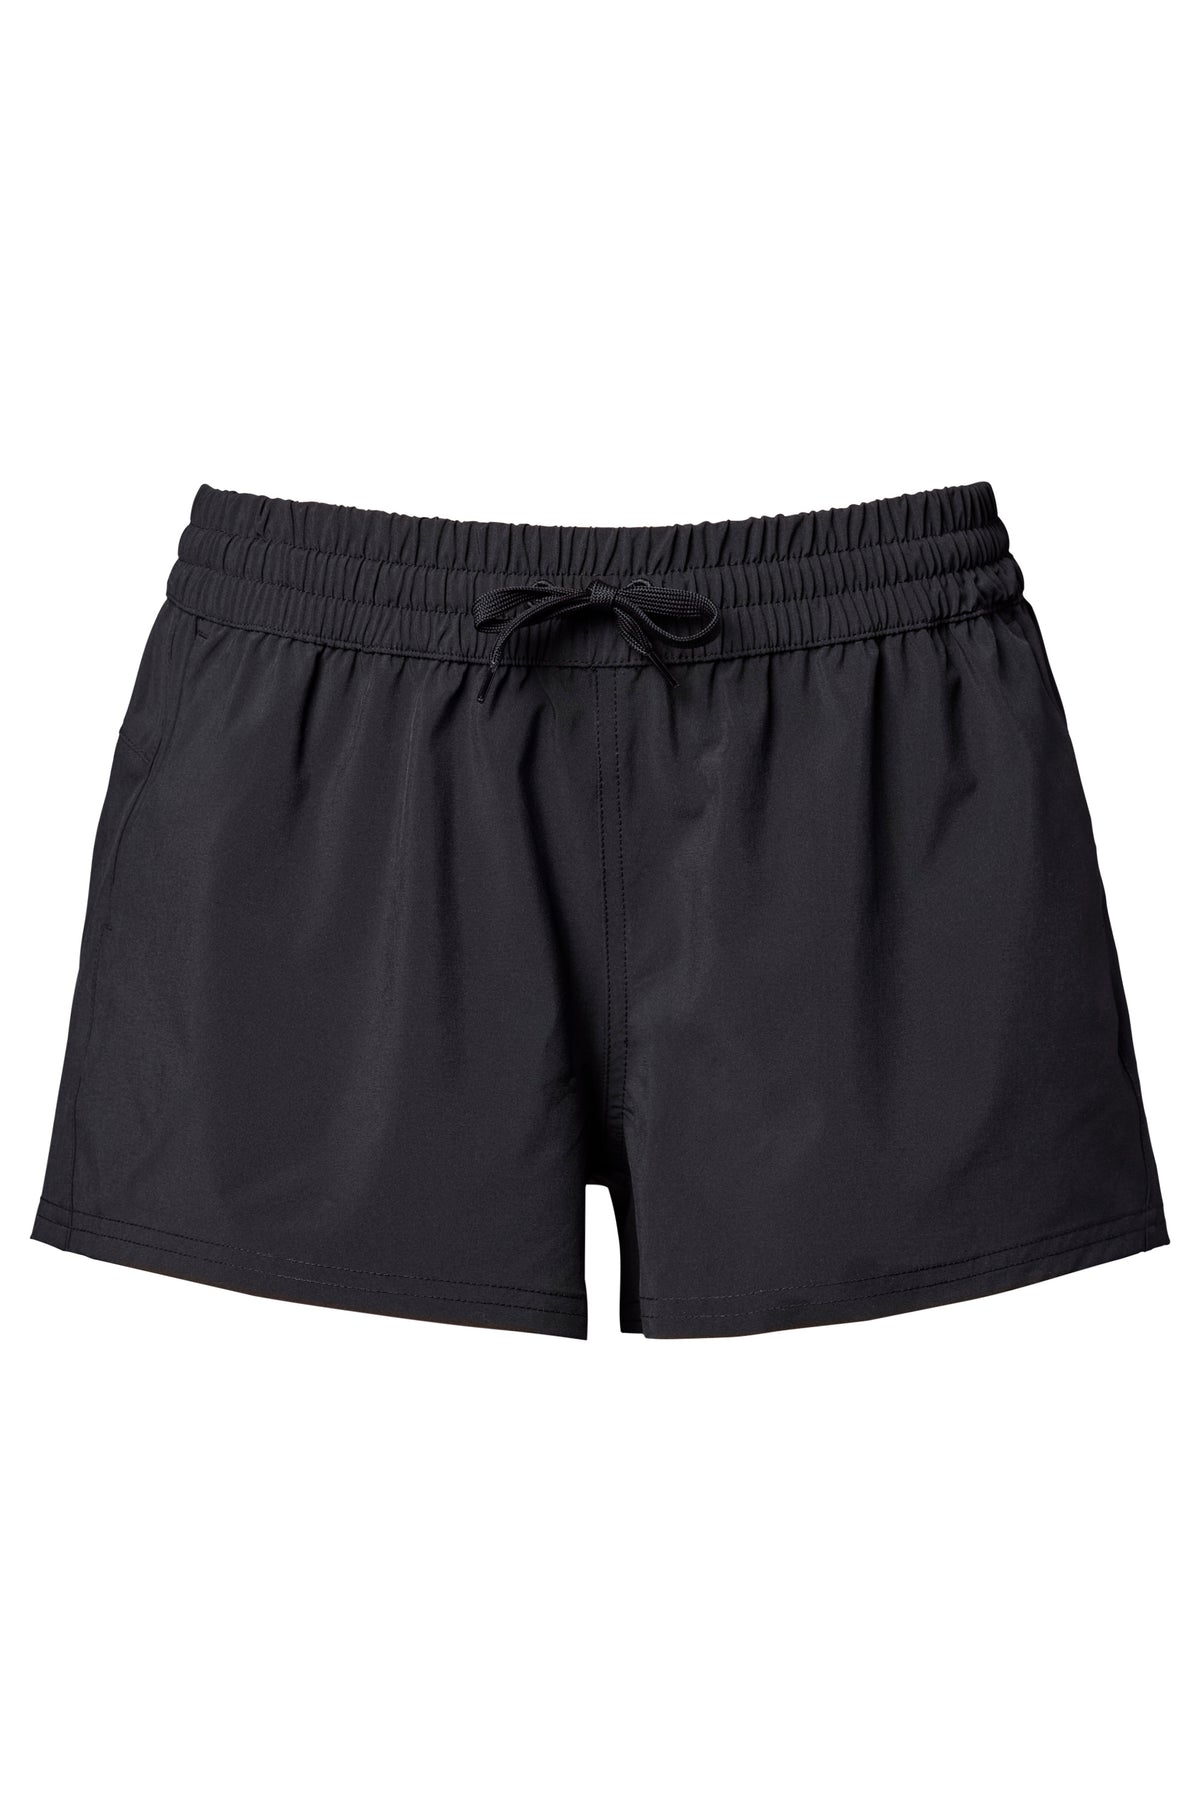 Up To 86% Off on Mens 2 in 1 Running Shorts Qu